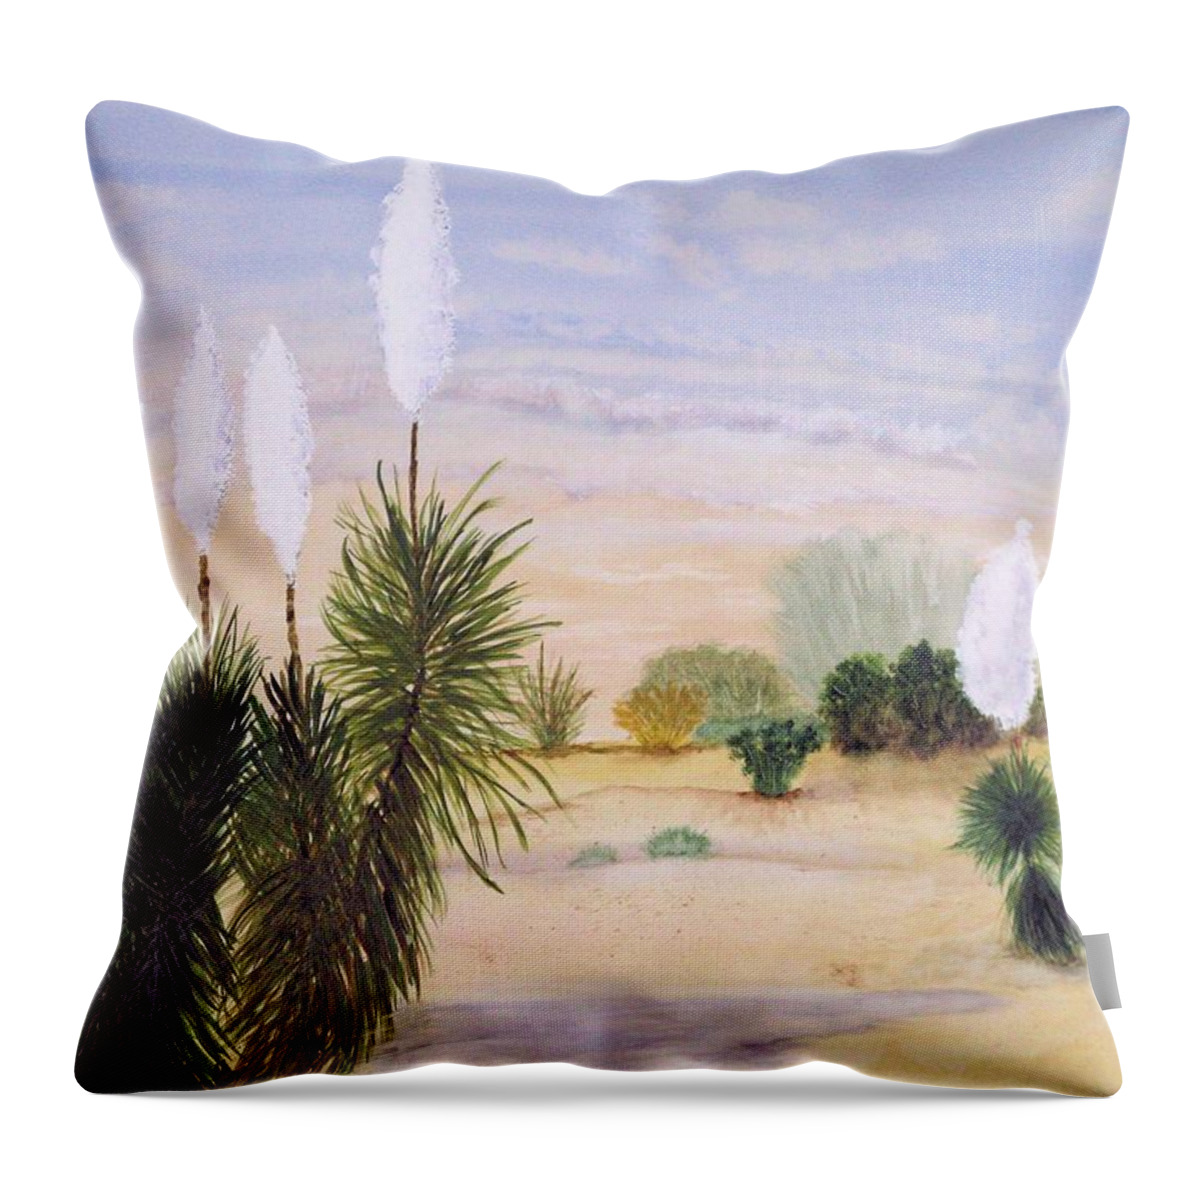 Desert Throw Pillow featuring the painting 9 Yuccas 2 by Maris Sherwood